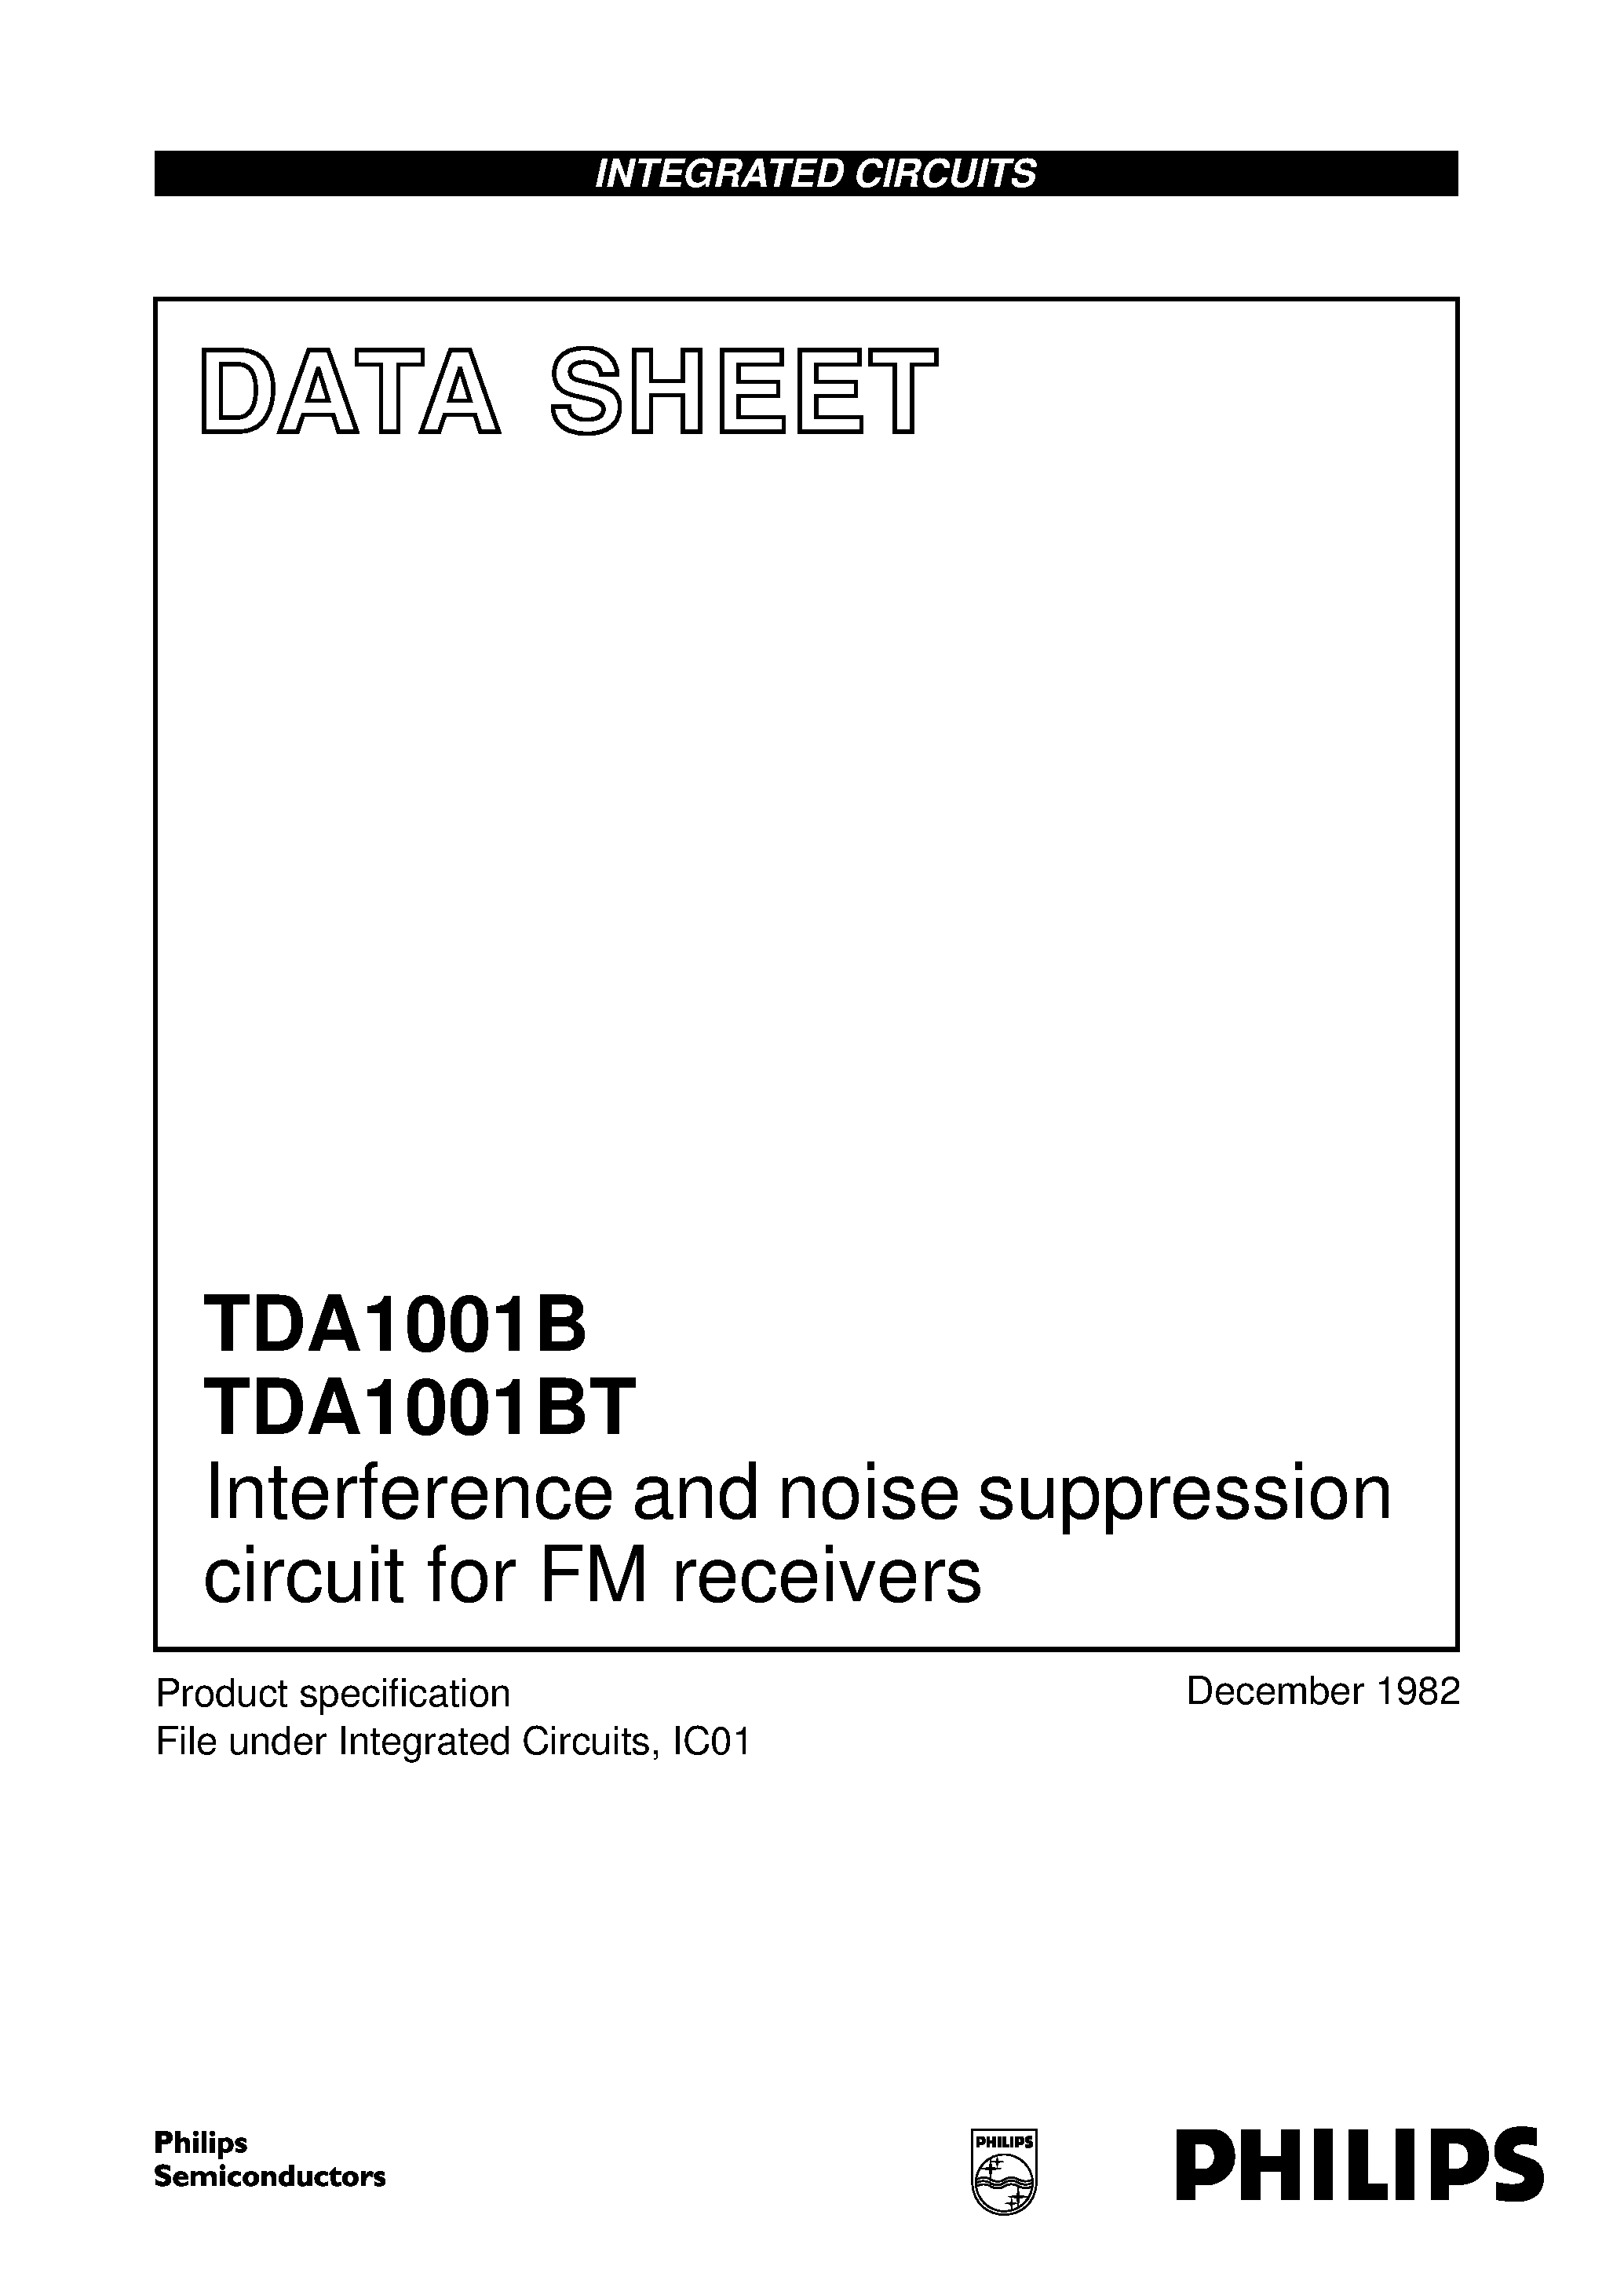 Datasheet TDA1001 - Interference and noise suppression circuit for FM receivers page 1